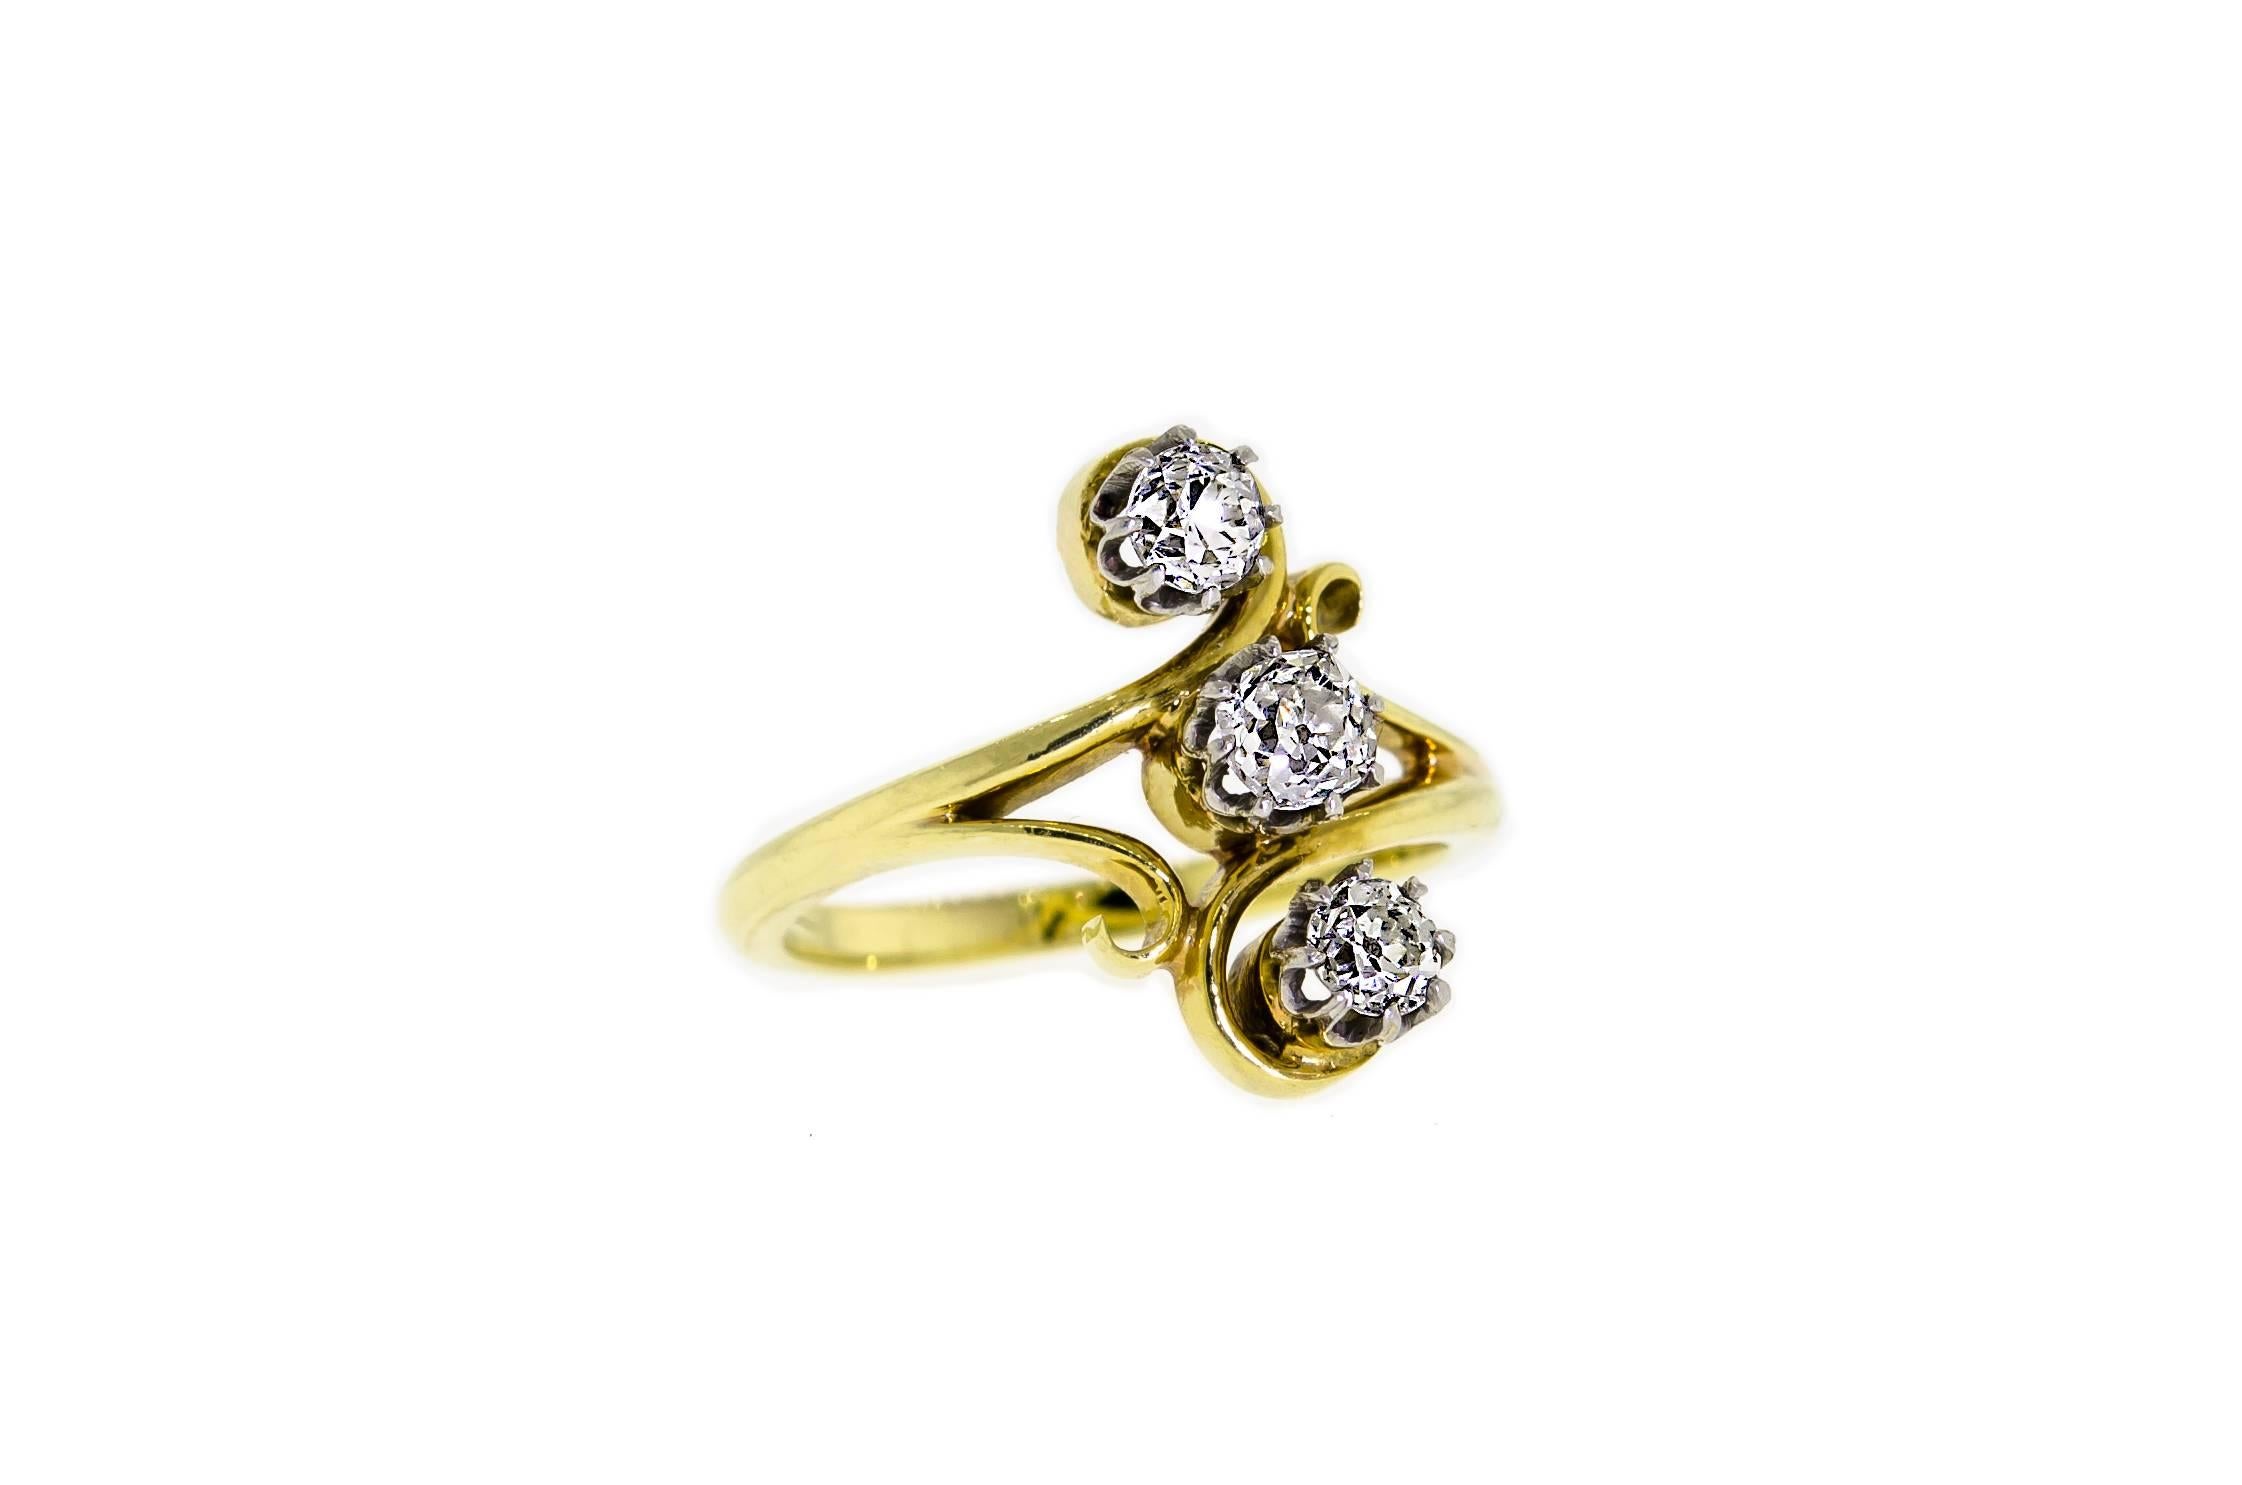 This lovely lady's, Art Nouveau, Circa 1900, 18kt yellow gold ring set with three dazzling (3) Old European Cut diamonds with an approximate total weight of 0.95 - 1.00cts is such an enchanting diamond ring.  

Excellent clean Old European Cut